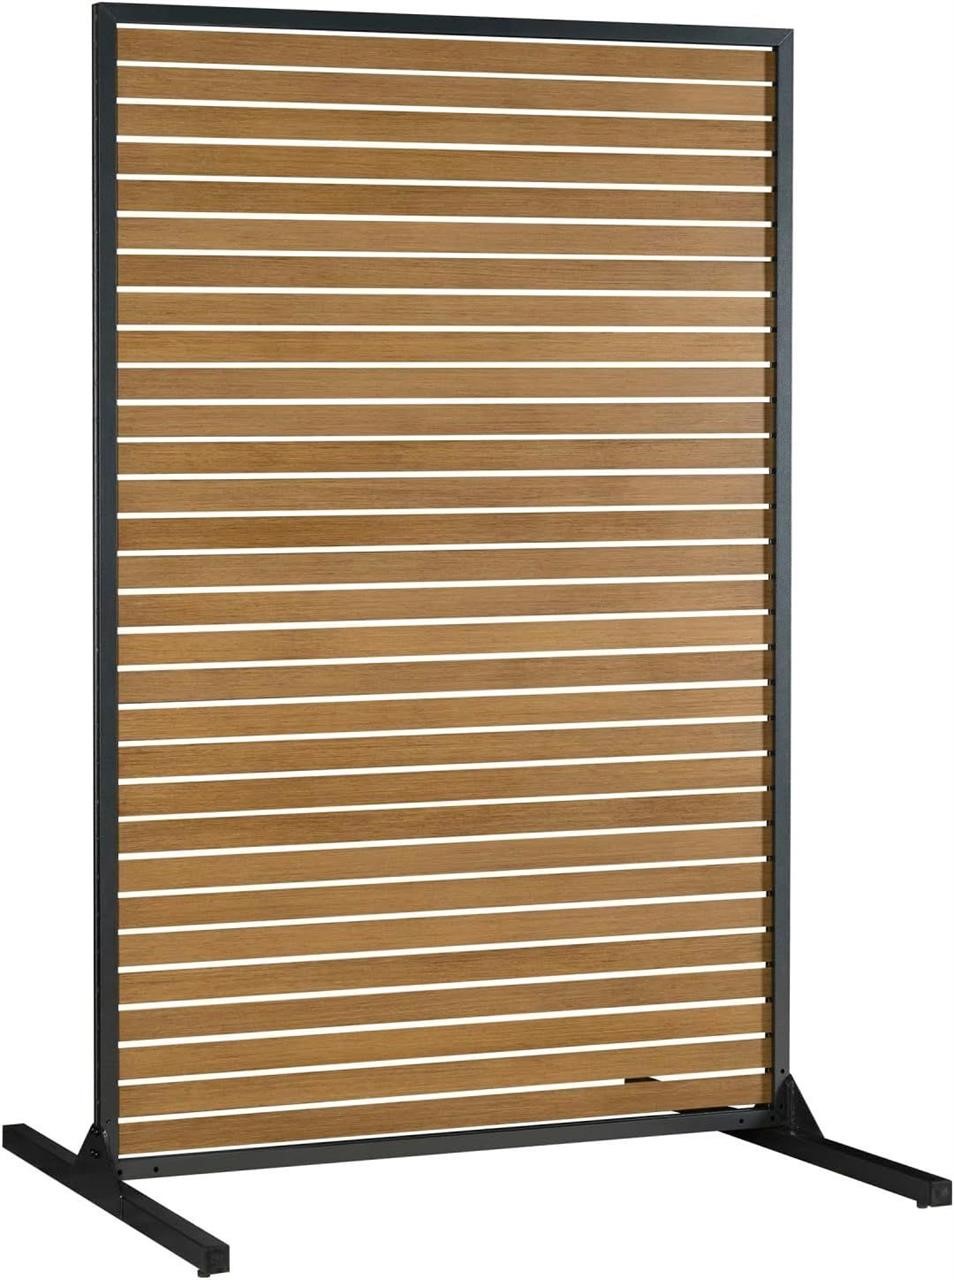 Slat Panel Wall/Outdoor Privacy Screen